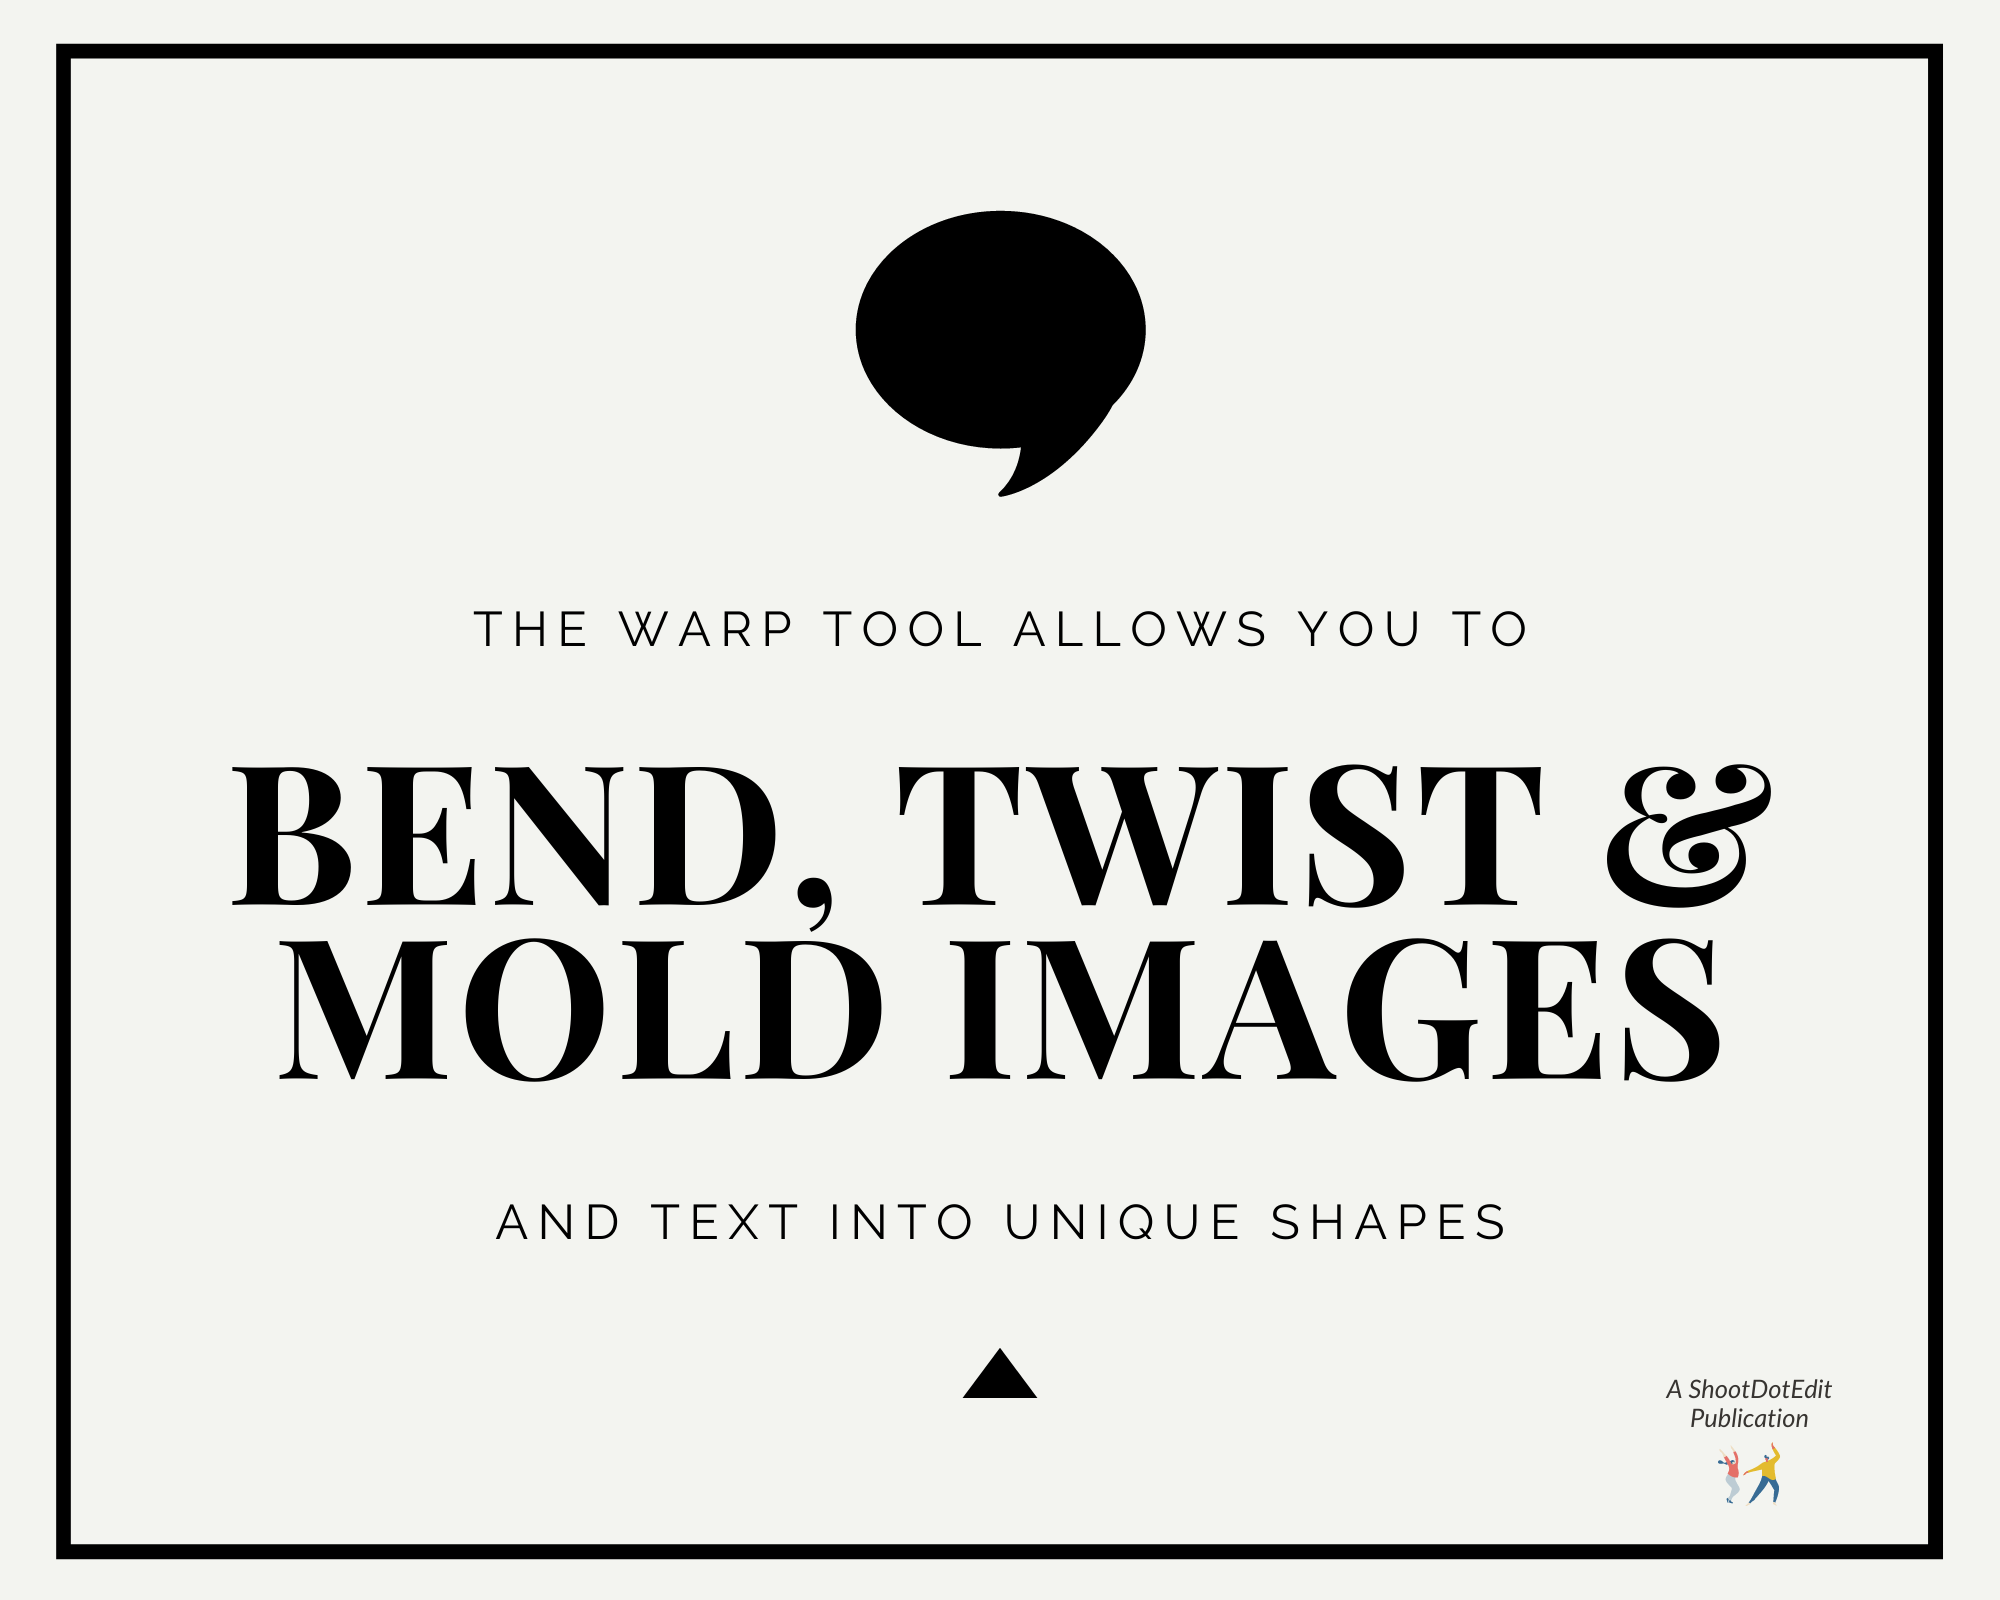 Infographic stating the warp tool allows you to bend, twist, and mold images and text into unique shapes